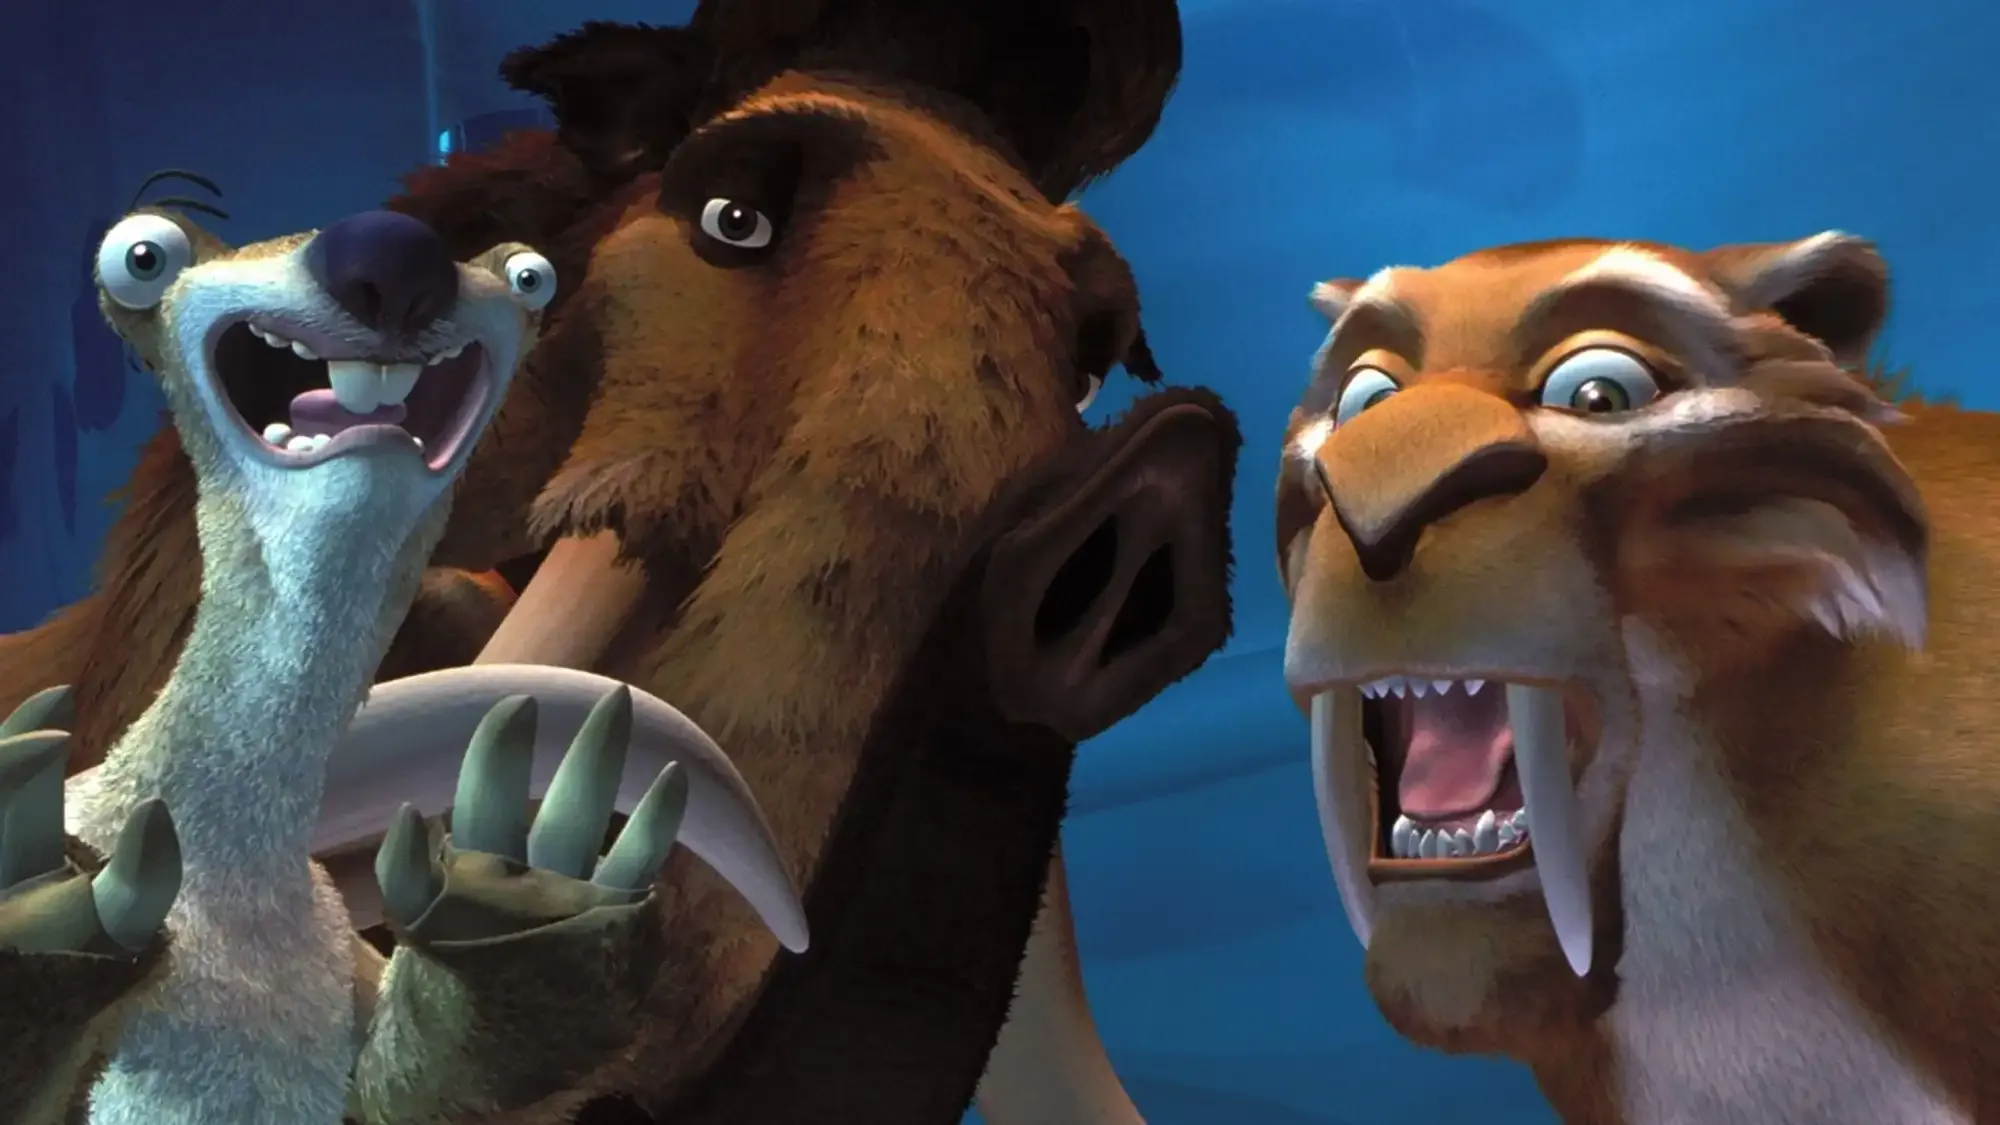 Ice Age movie review